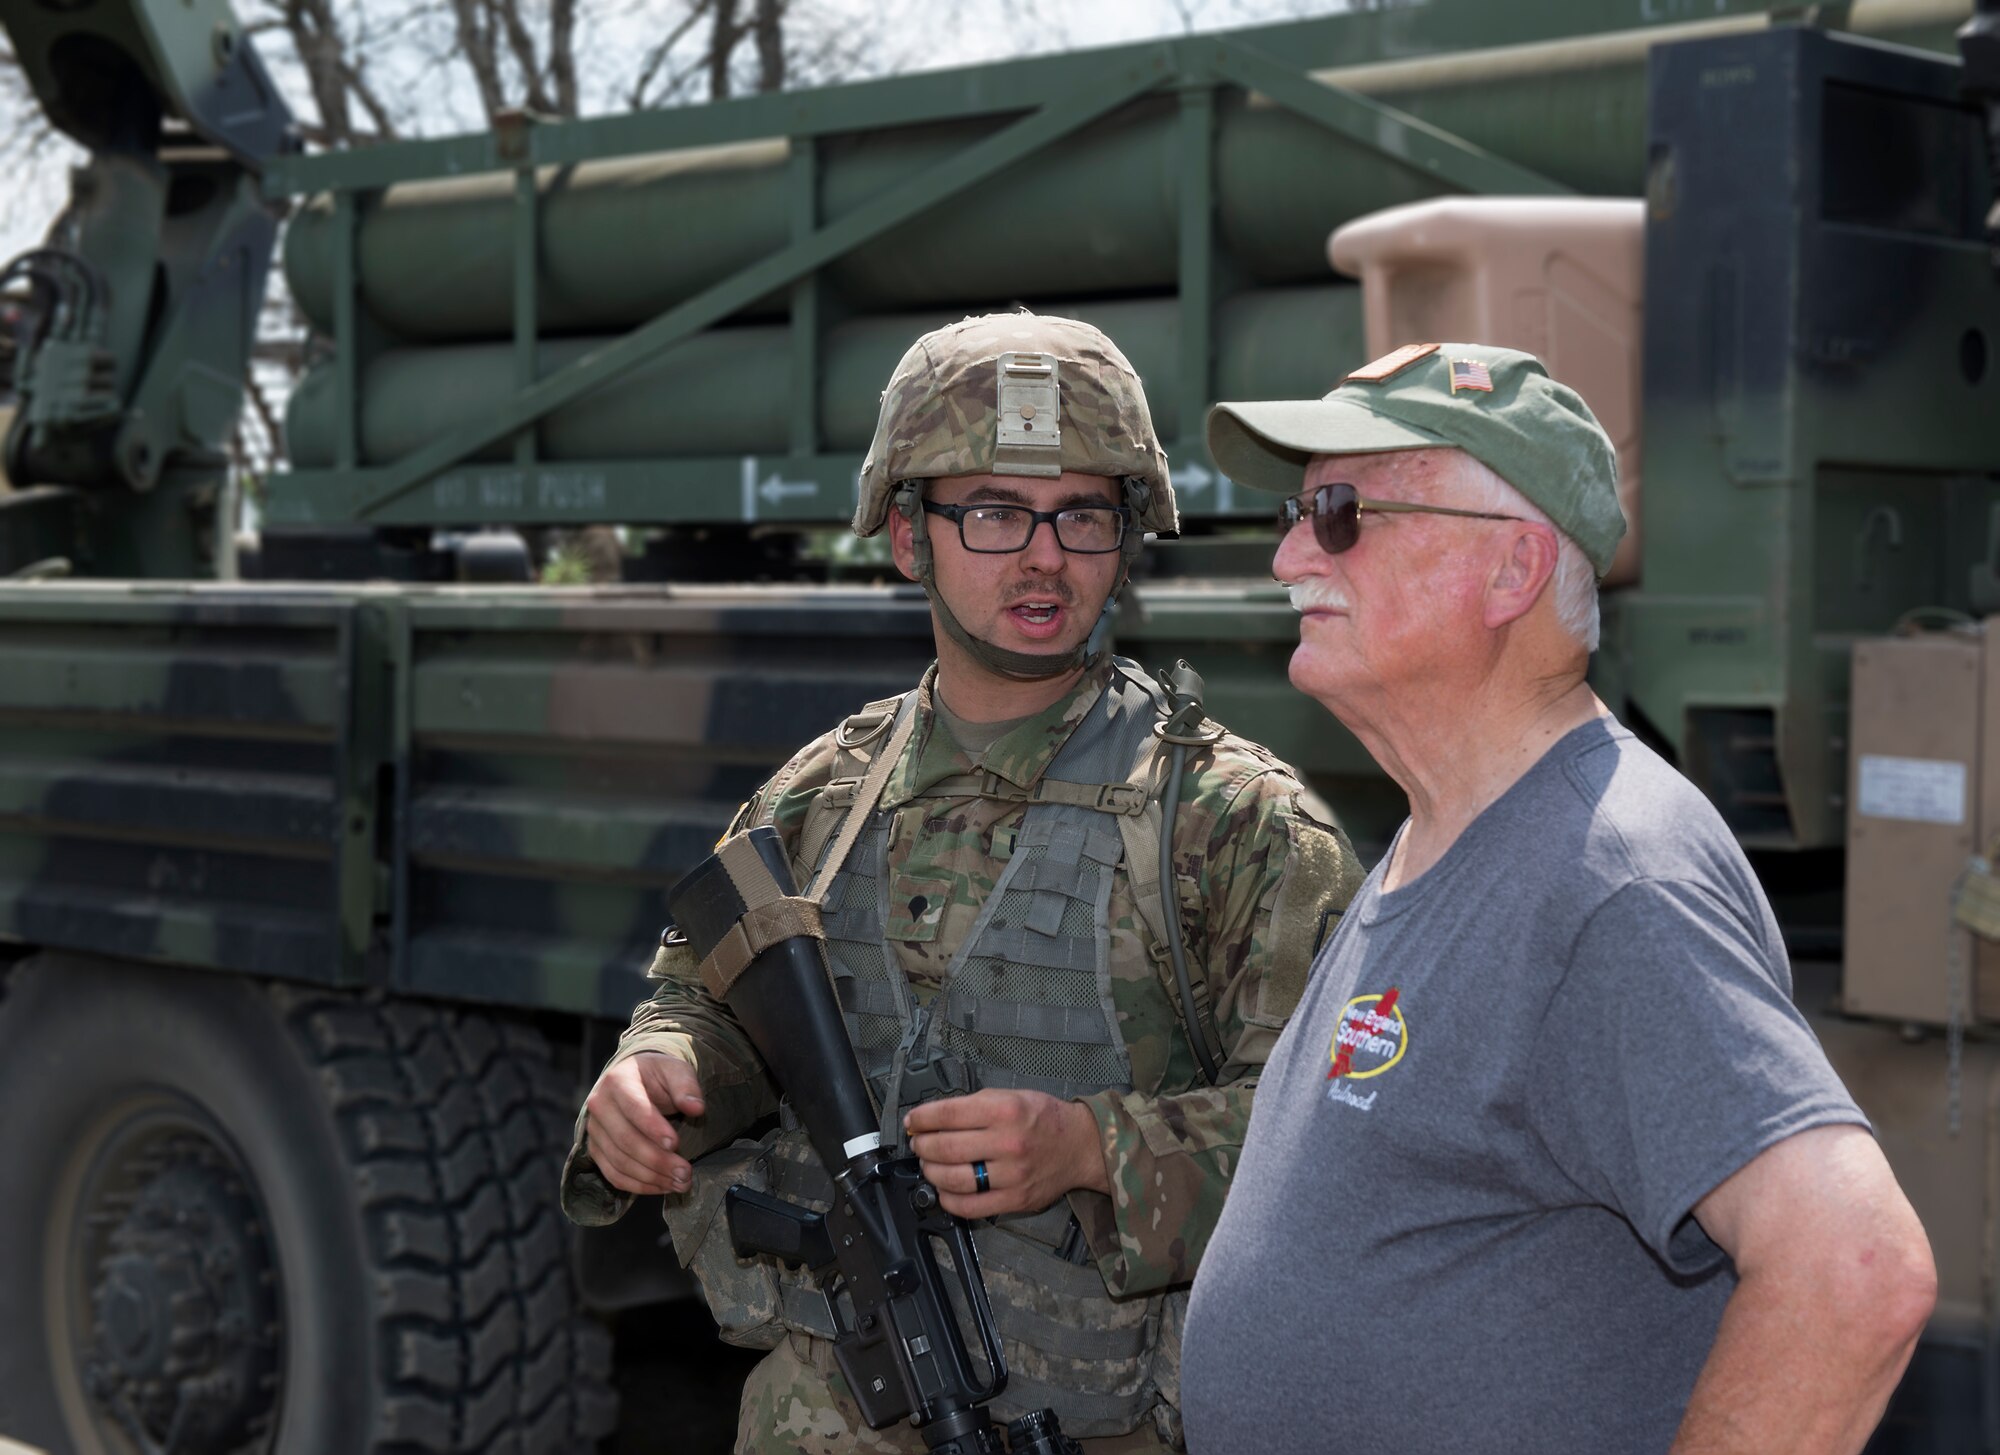 Army Spc. Caulin L. Gagne, a muliti-launch rocket system crewman assigned to the 197th Field Artillery Brigade, answers questions about a weapon system on Aug. 14, 2018 at a traiining site on Camp Grayling, Mich. Peter Dearness, the owner of New England Southern Railroad, visited the 197th FAB during their annual training as part of a tour with the N.H. Employer Support of the Guard and Reserve. (Photo by Staff Sgt. Kayla White, 157th Air Refueling Wing Public Affairs)